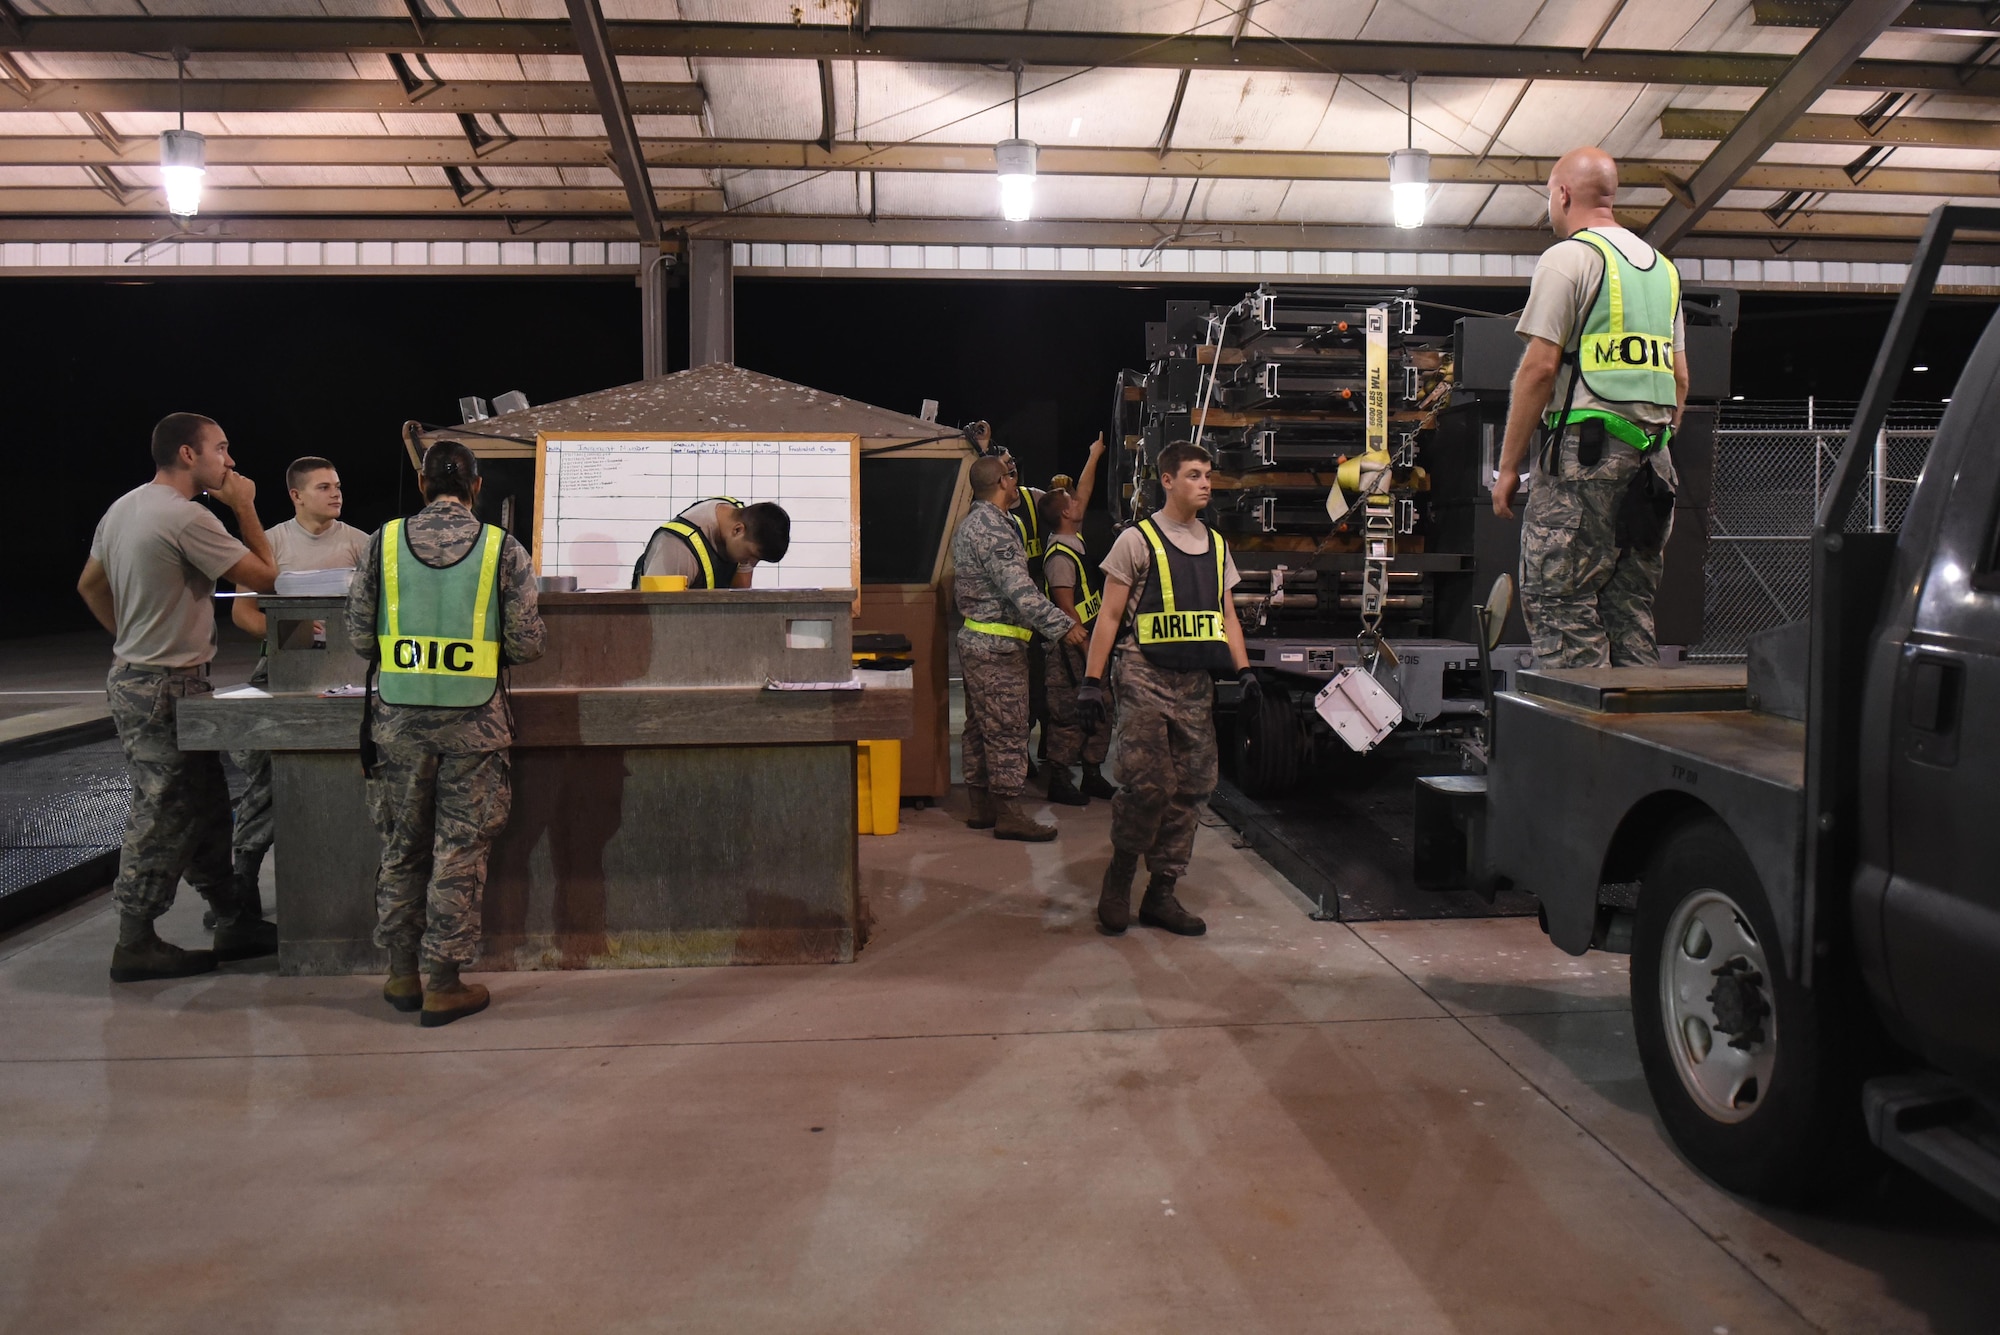 Members of the 4th Fighter Wing prepare cargo equipment for a simulated transport during exercise Thunderdome 17-02, July 20, 2017, at Seymour Johnson Air Force Base, North Carolina. By working together during the exercise, members of the 4th Fighter Wing continue to enhance cargo transportation capabilities. (U.S. Air Force photo by Airman 1st Class Victoria Boyton)